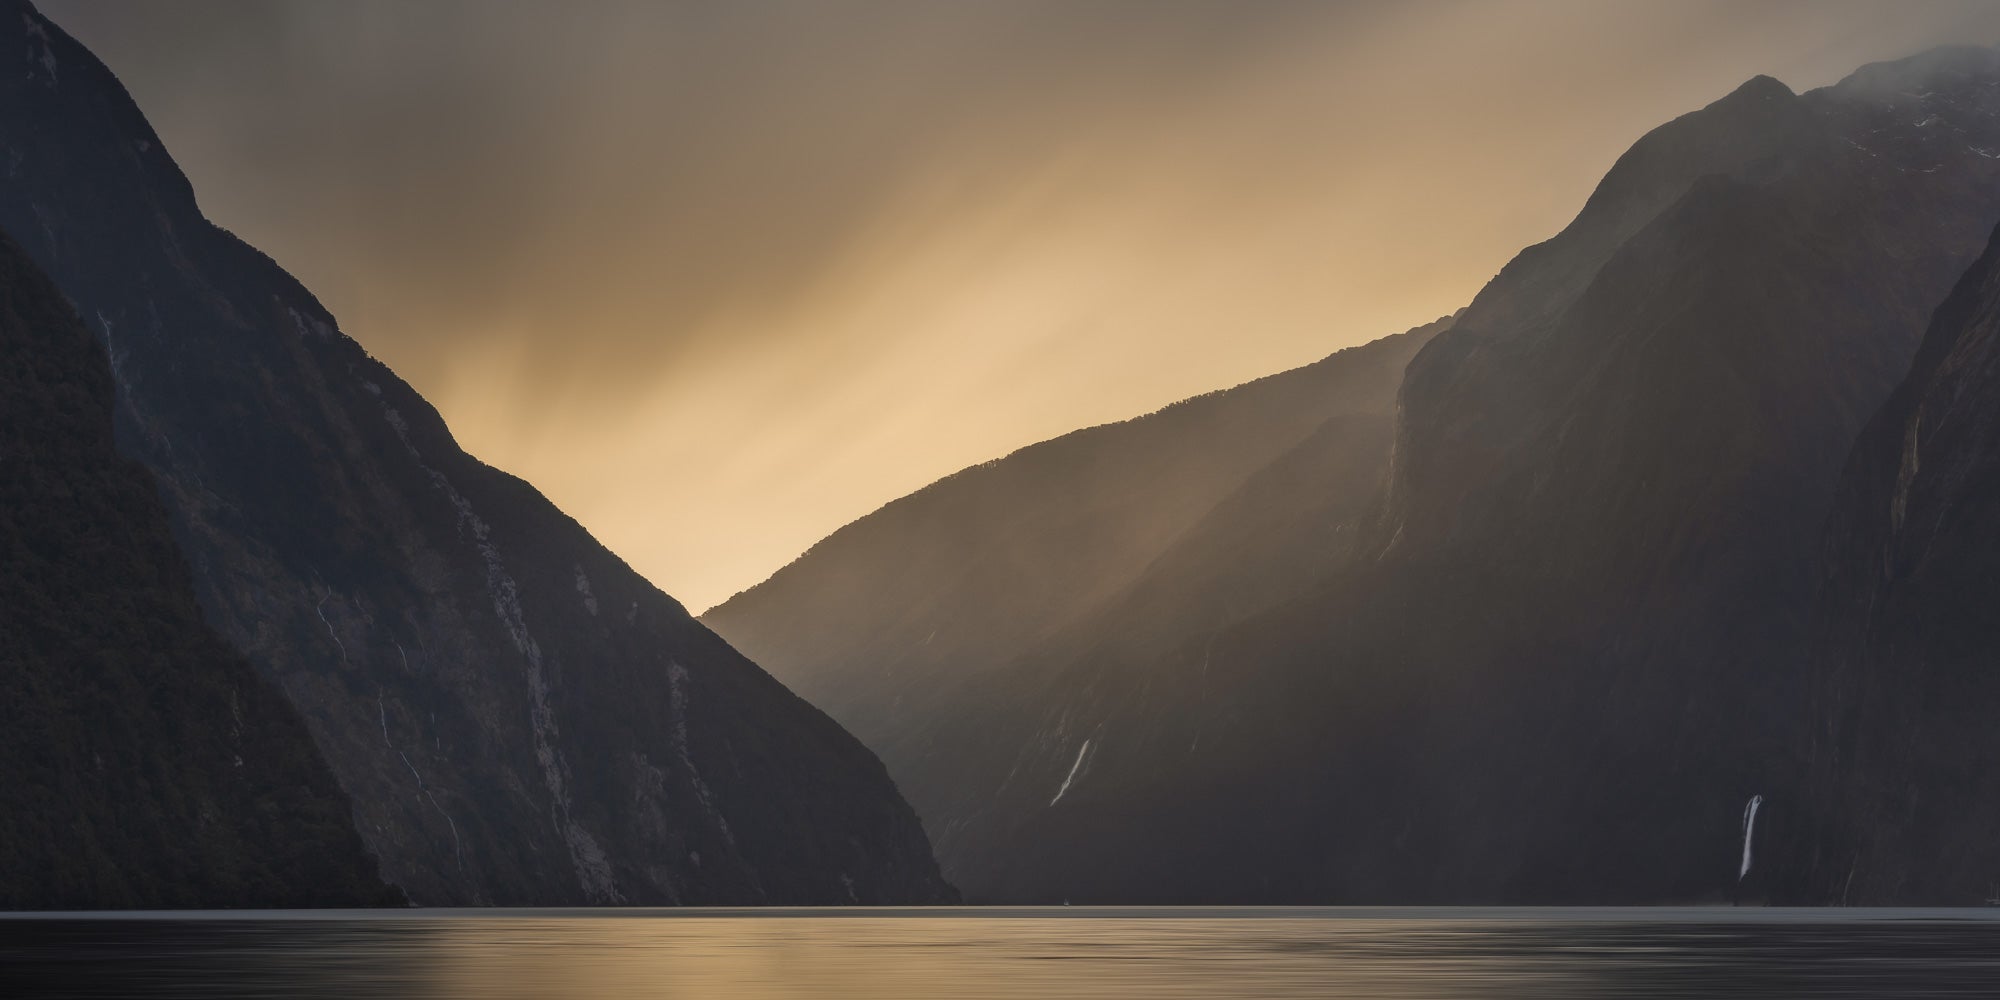 A sailboat sails on Milford Sound, New Zealand, with golden sunlight streaming through the mountainous valley.